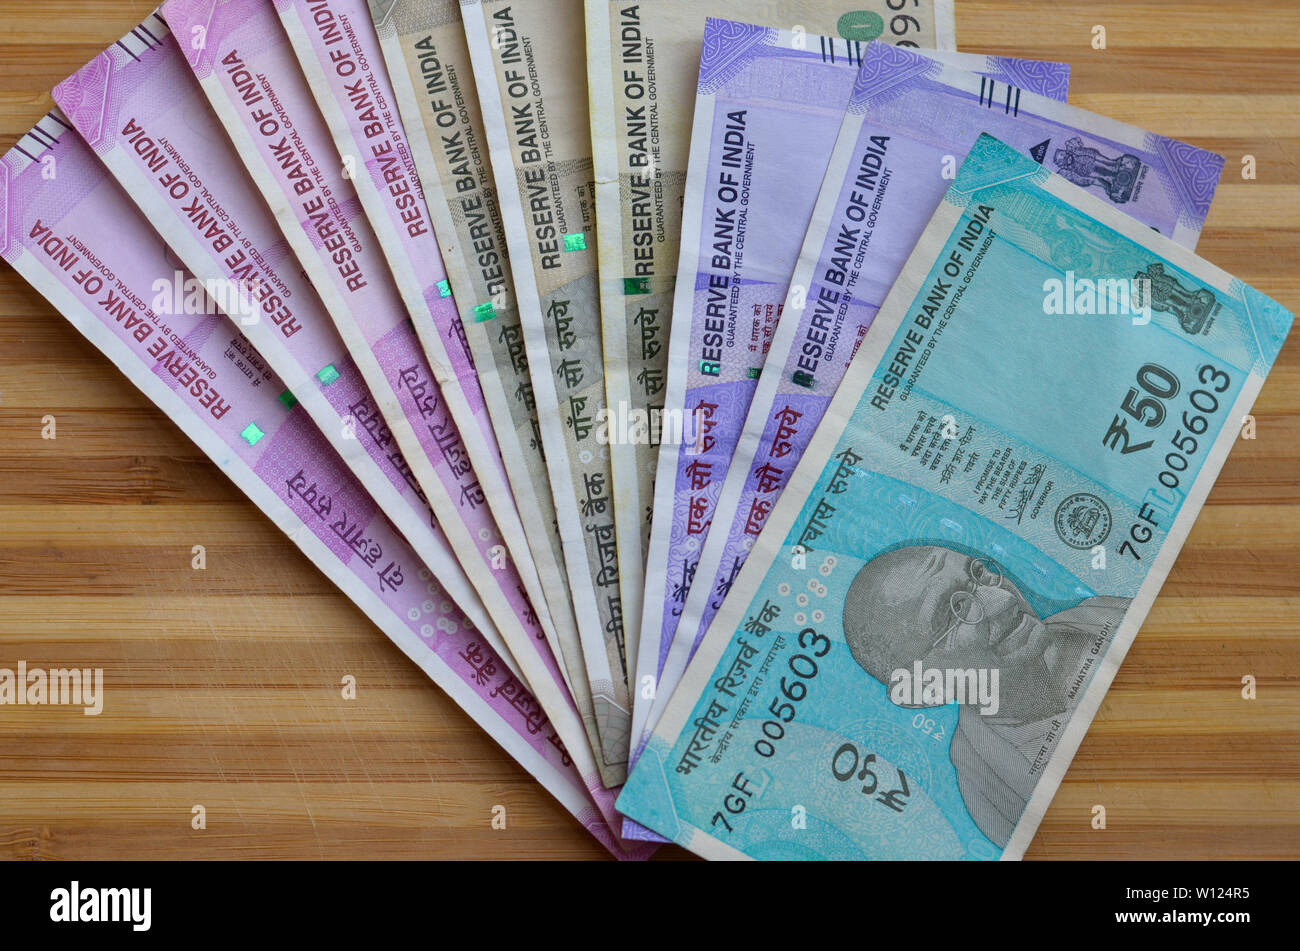 Closeup of new colorful Indian currency bank notes of 10, 50,100, 500 & 2000 rupees bundle issued and in circulation after demonetisation against wood Stock Photo